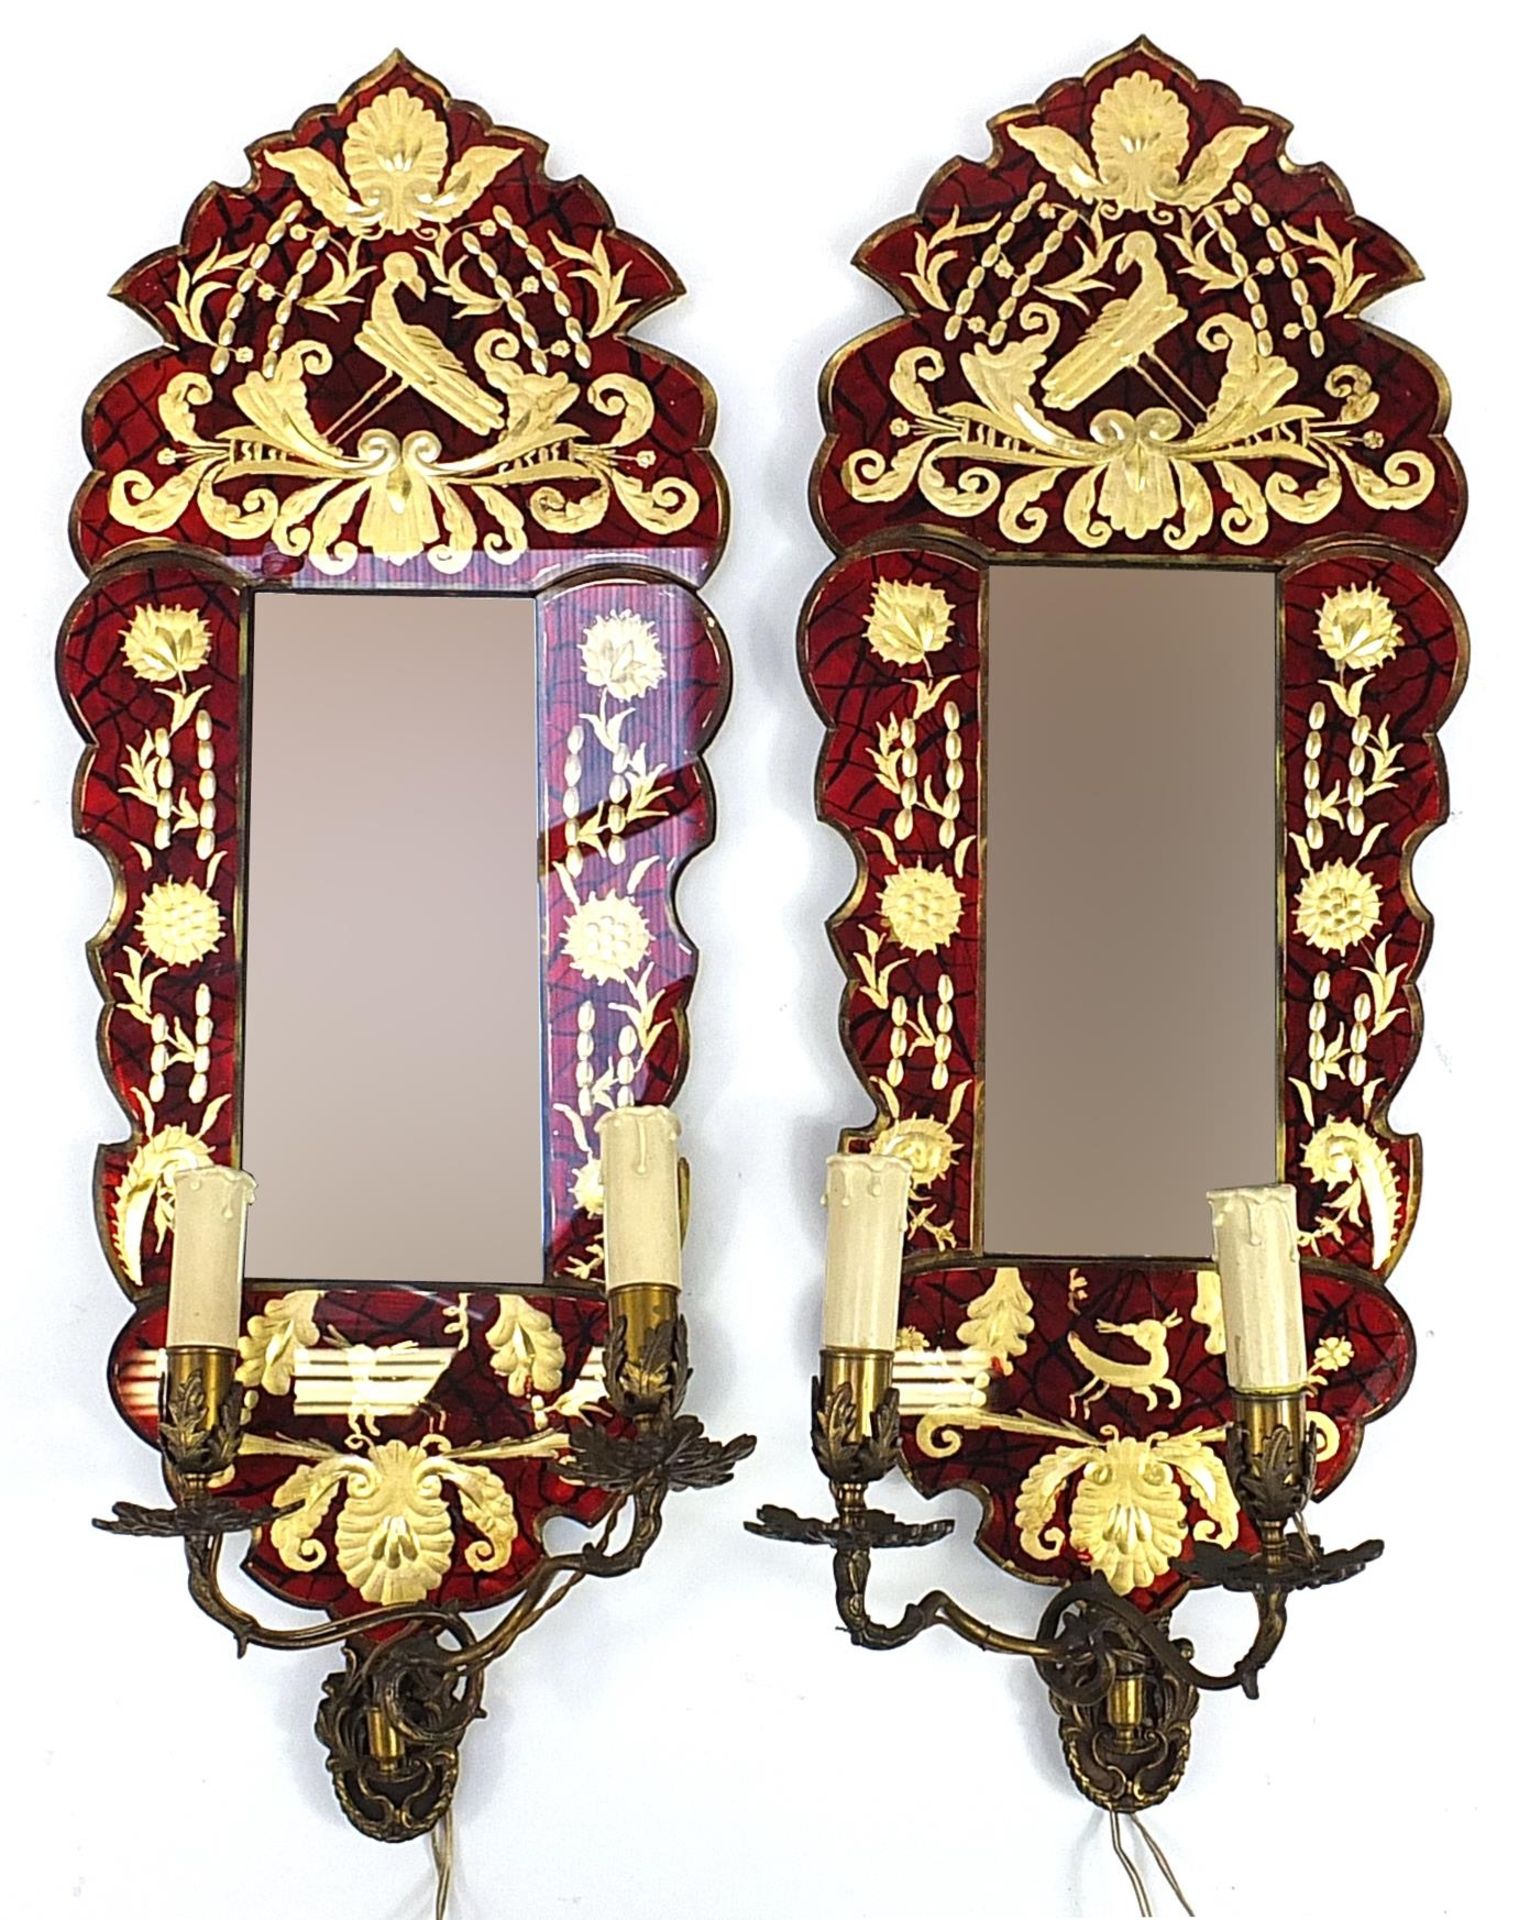 Pair of 19th century Venetian glass and gilt metal two branch mirrored wall sconces gilded with